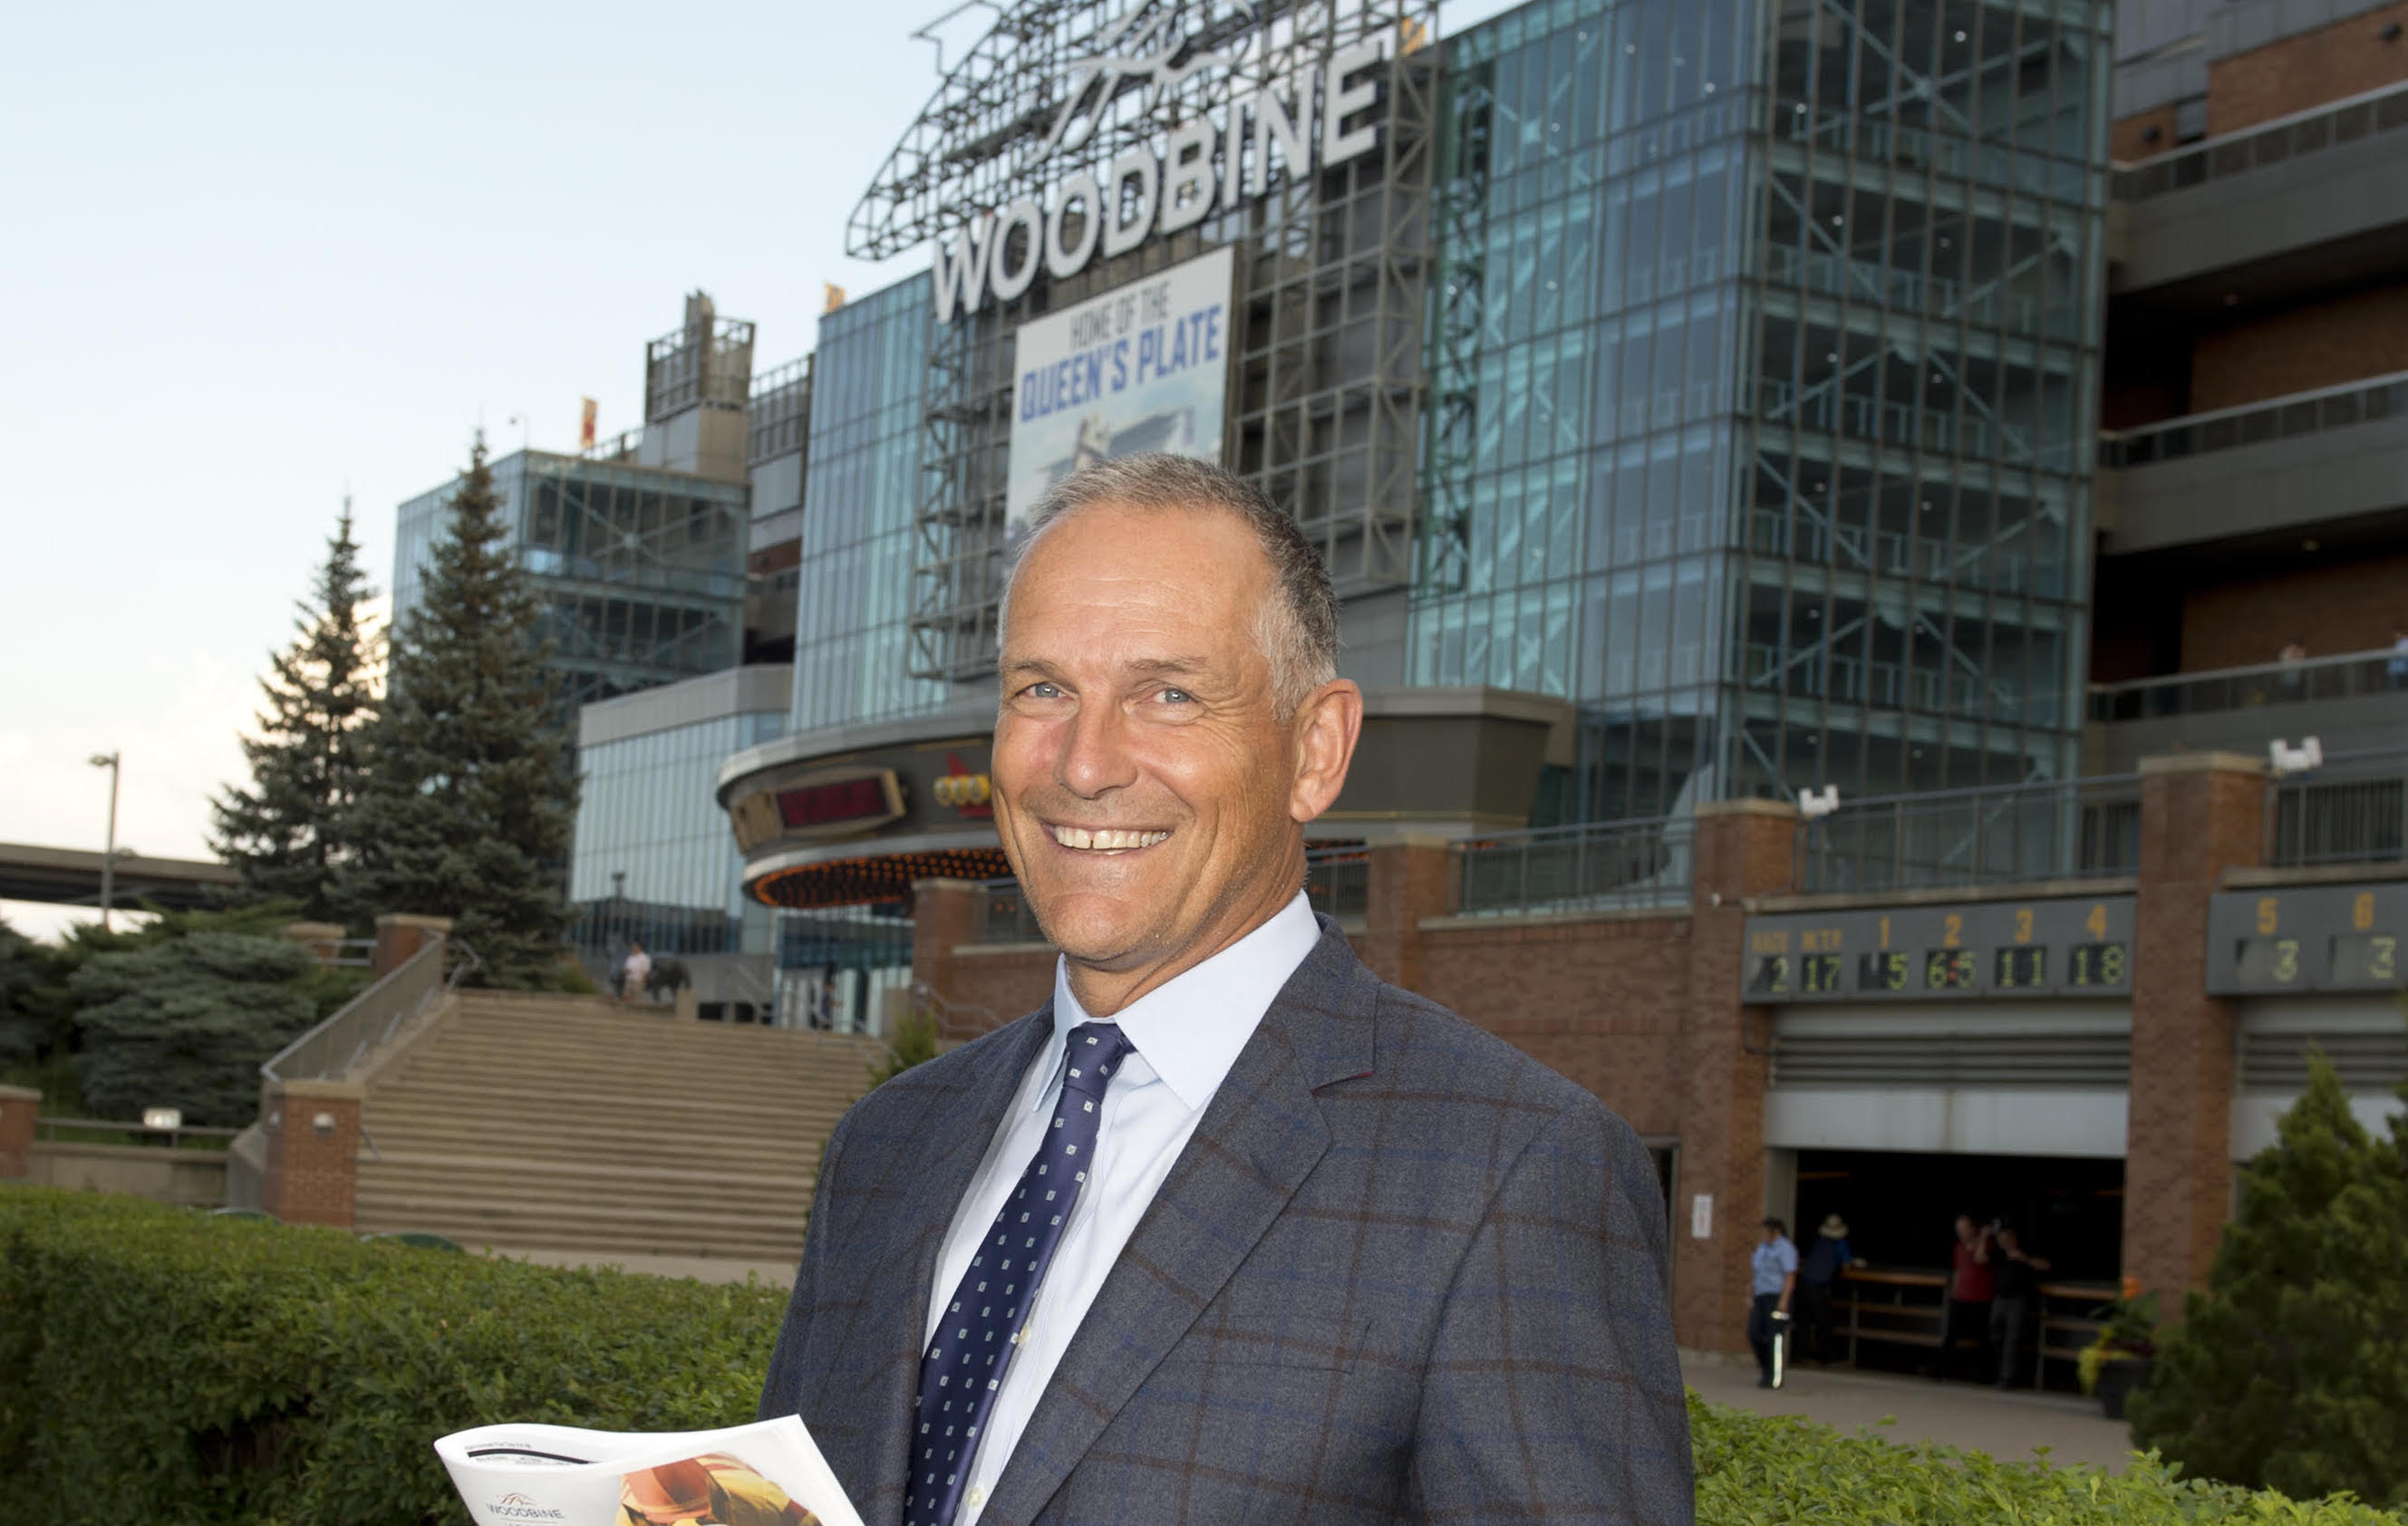 Woodbine chief executive Jim Lawson: “The competition for the entertainment dollar is intense.” Photo: Michael Burns